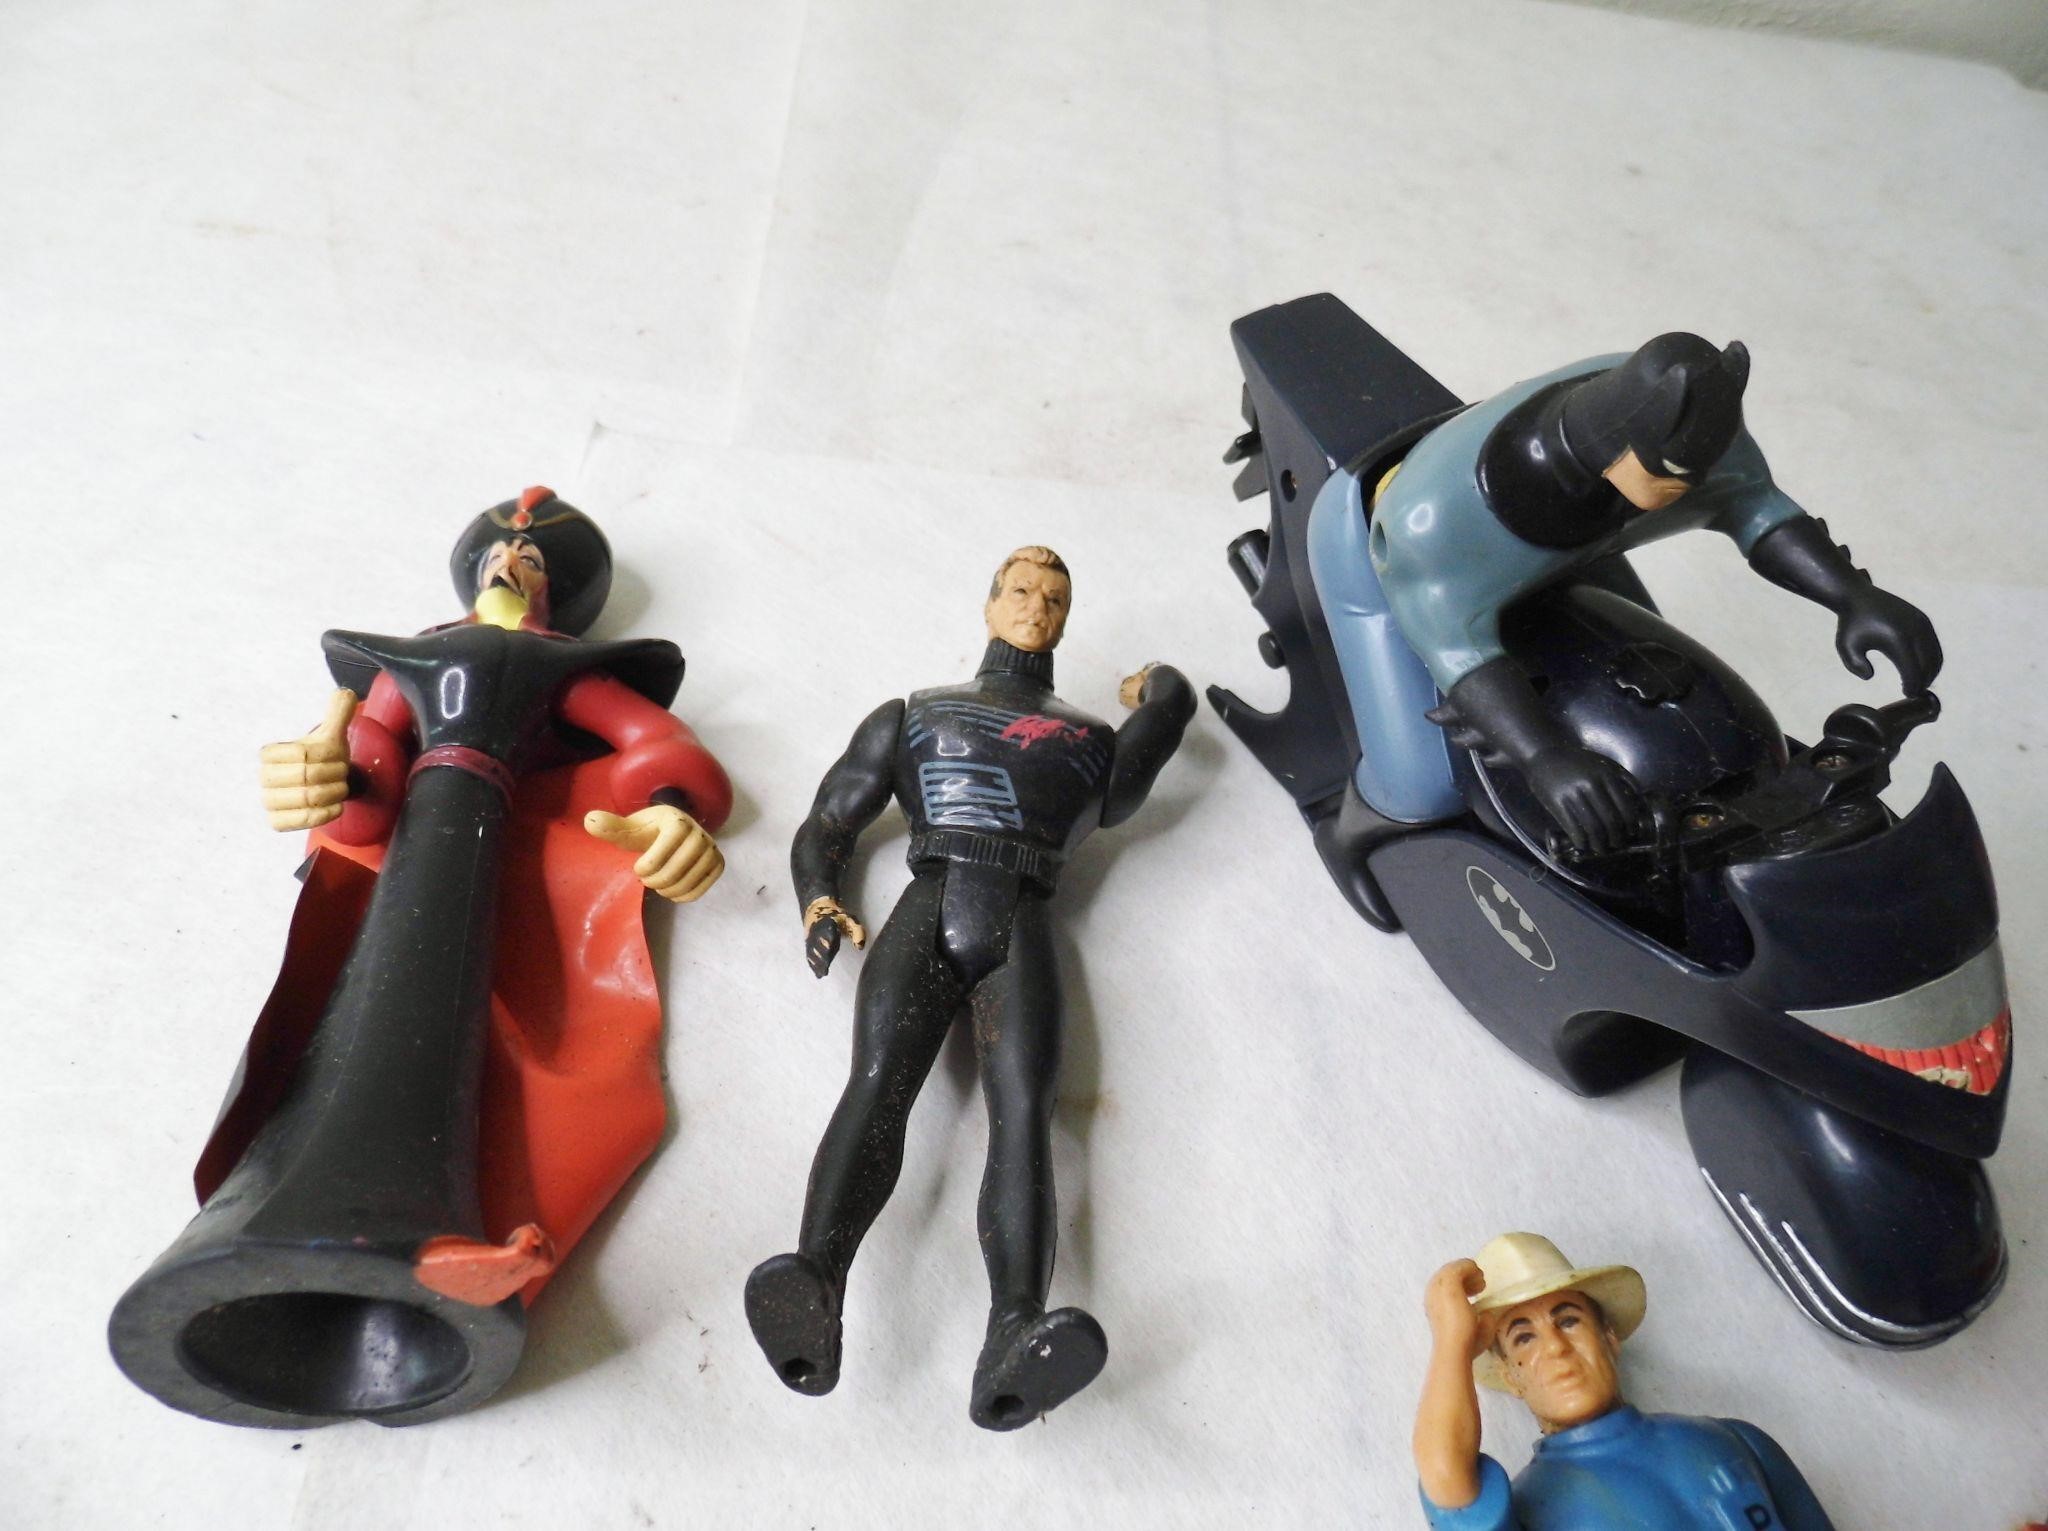 Lot of Assorted Action Figures